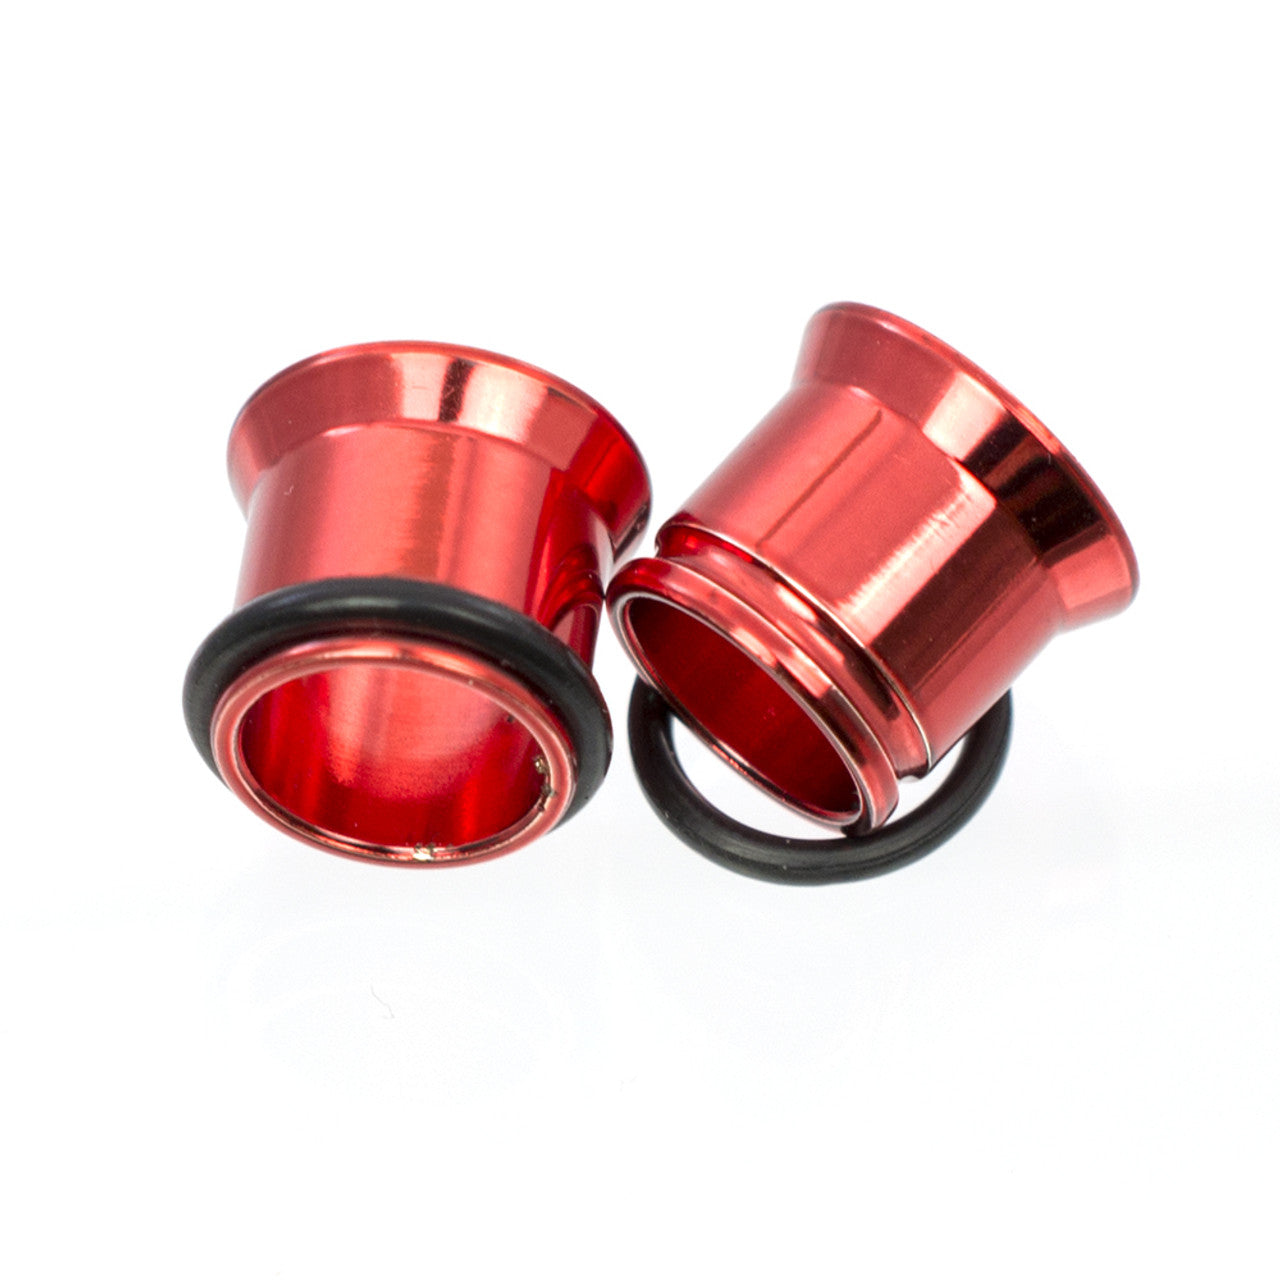 Surgical Steel Red Single Flare Plug Ear Tunnel 8 to 9/16" Gauge - Set